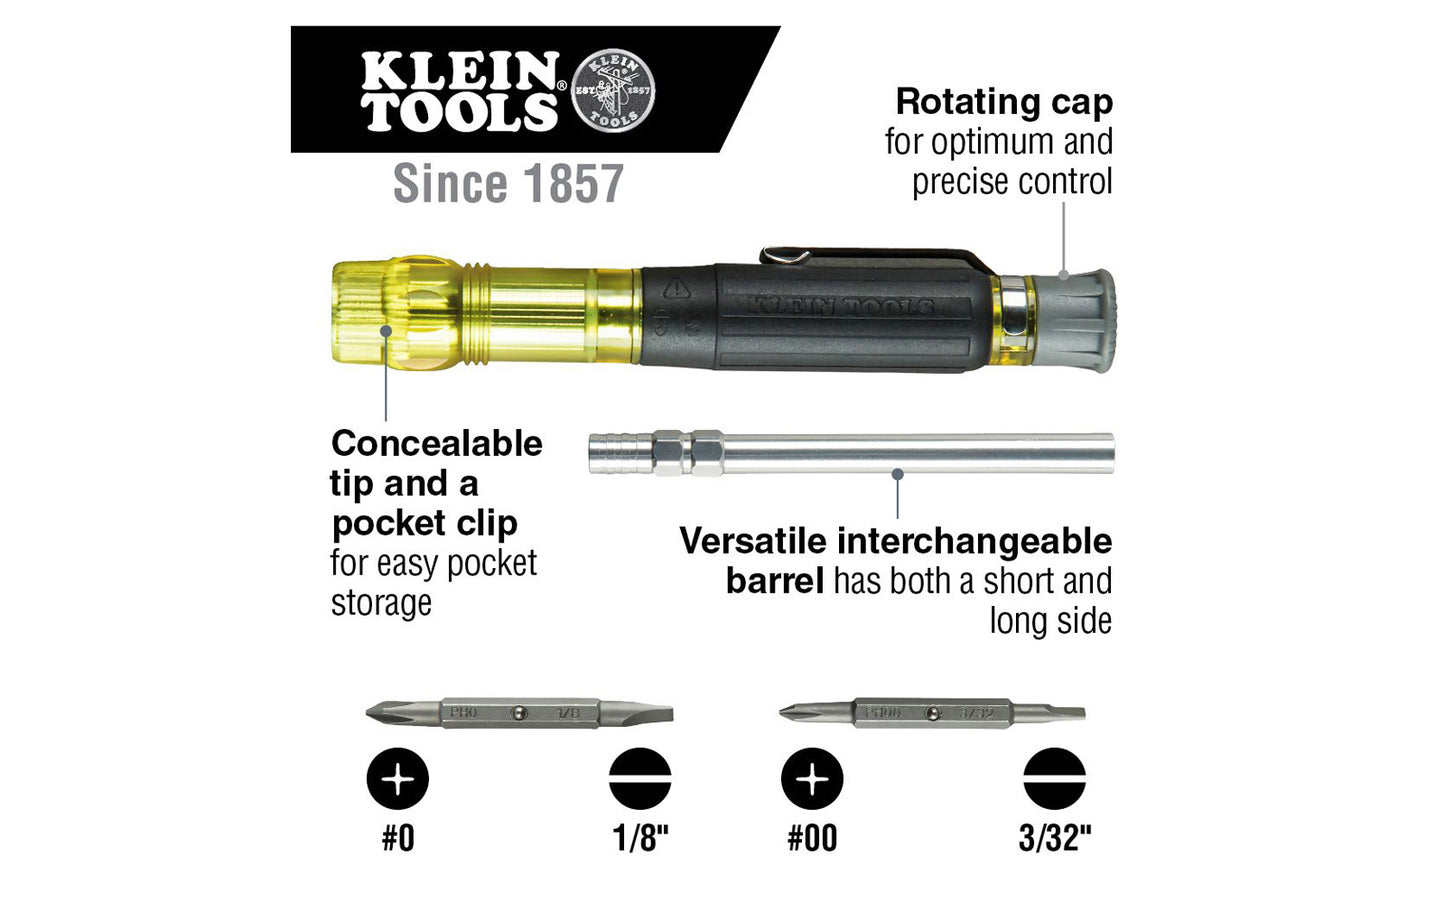 Klein Tools Electronics Pocket Screwdriver Model 32614 has four different tips in one tool, includes #0 & #00 Phillips plus 1/8" & 3/32" slotted tips. Rotating cap for optimum & precise control. Concealable tips & pocket clip for easy pocket storage. Steel bits with heat treated precision ground tips. 092644326141